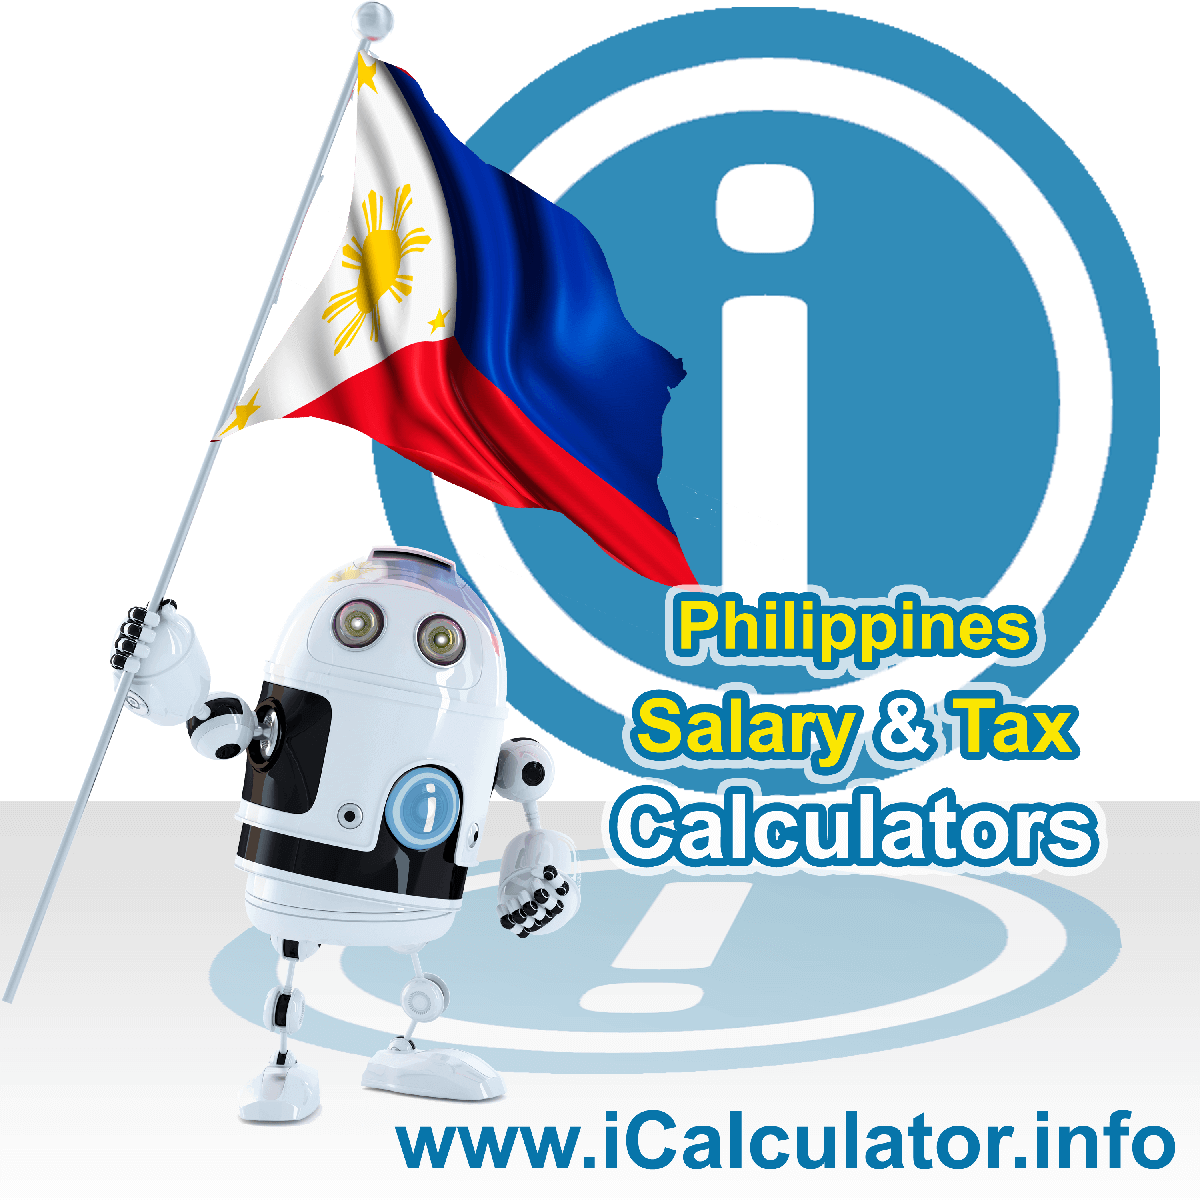 Philippines Salary Calculator. This image shows the Philippinesese flag and information relating to the tax formula for the Philippines Tax Calculator